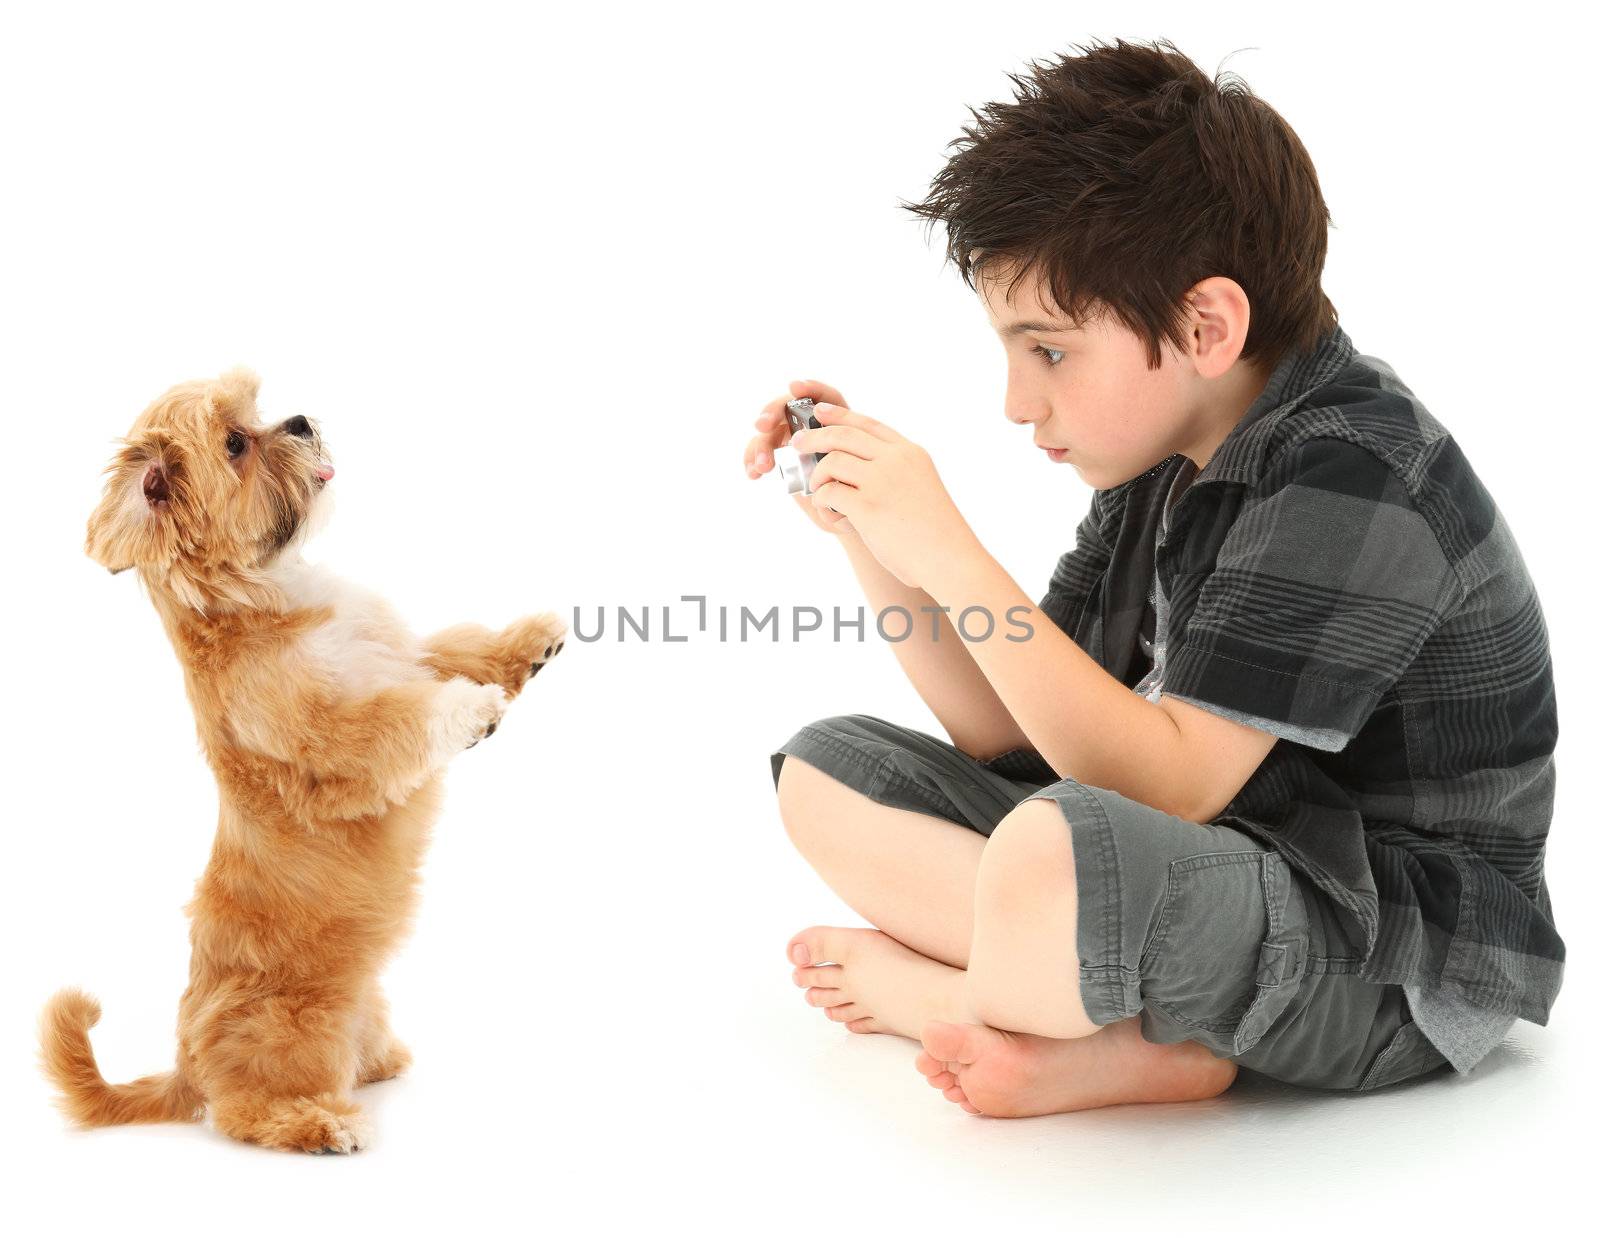 Adorable 8 year old boy shooting photos of his dog with digital camera over white background.